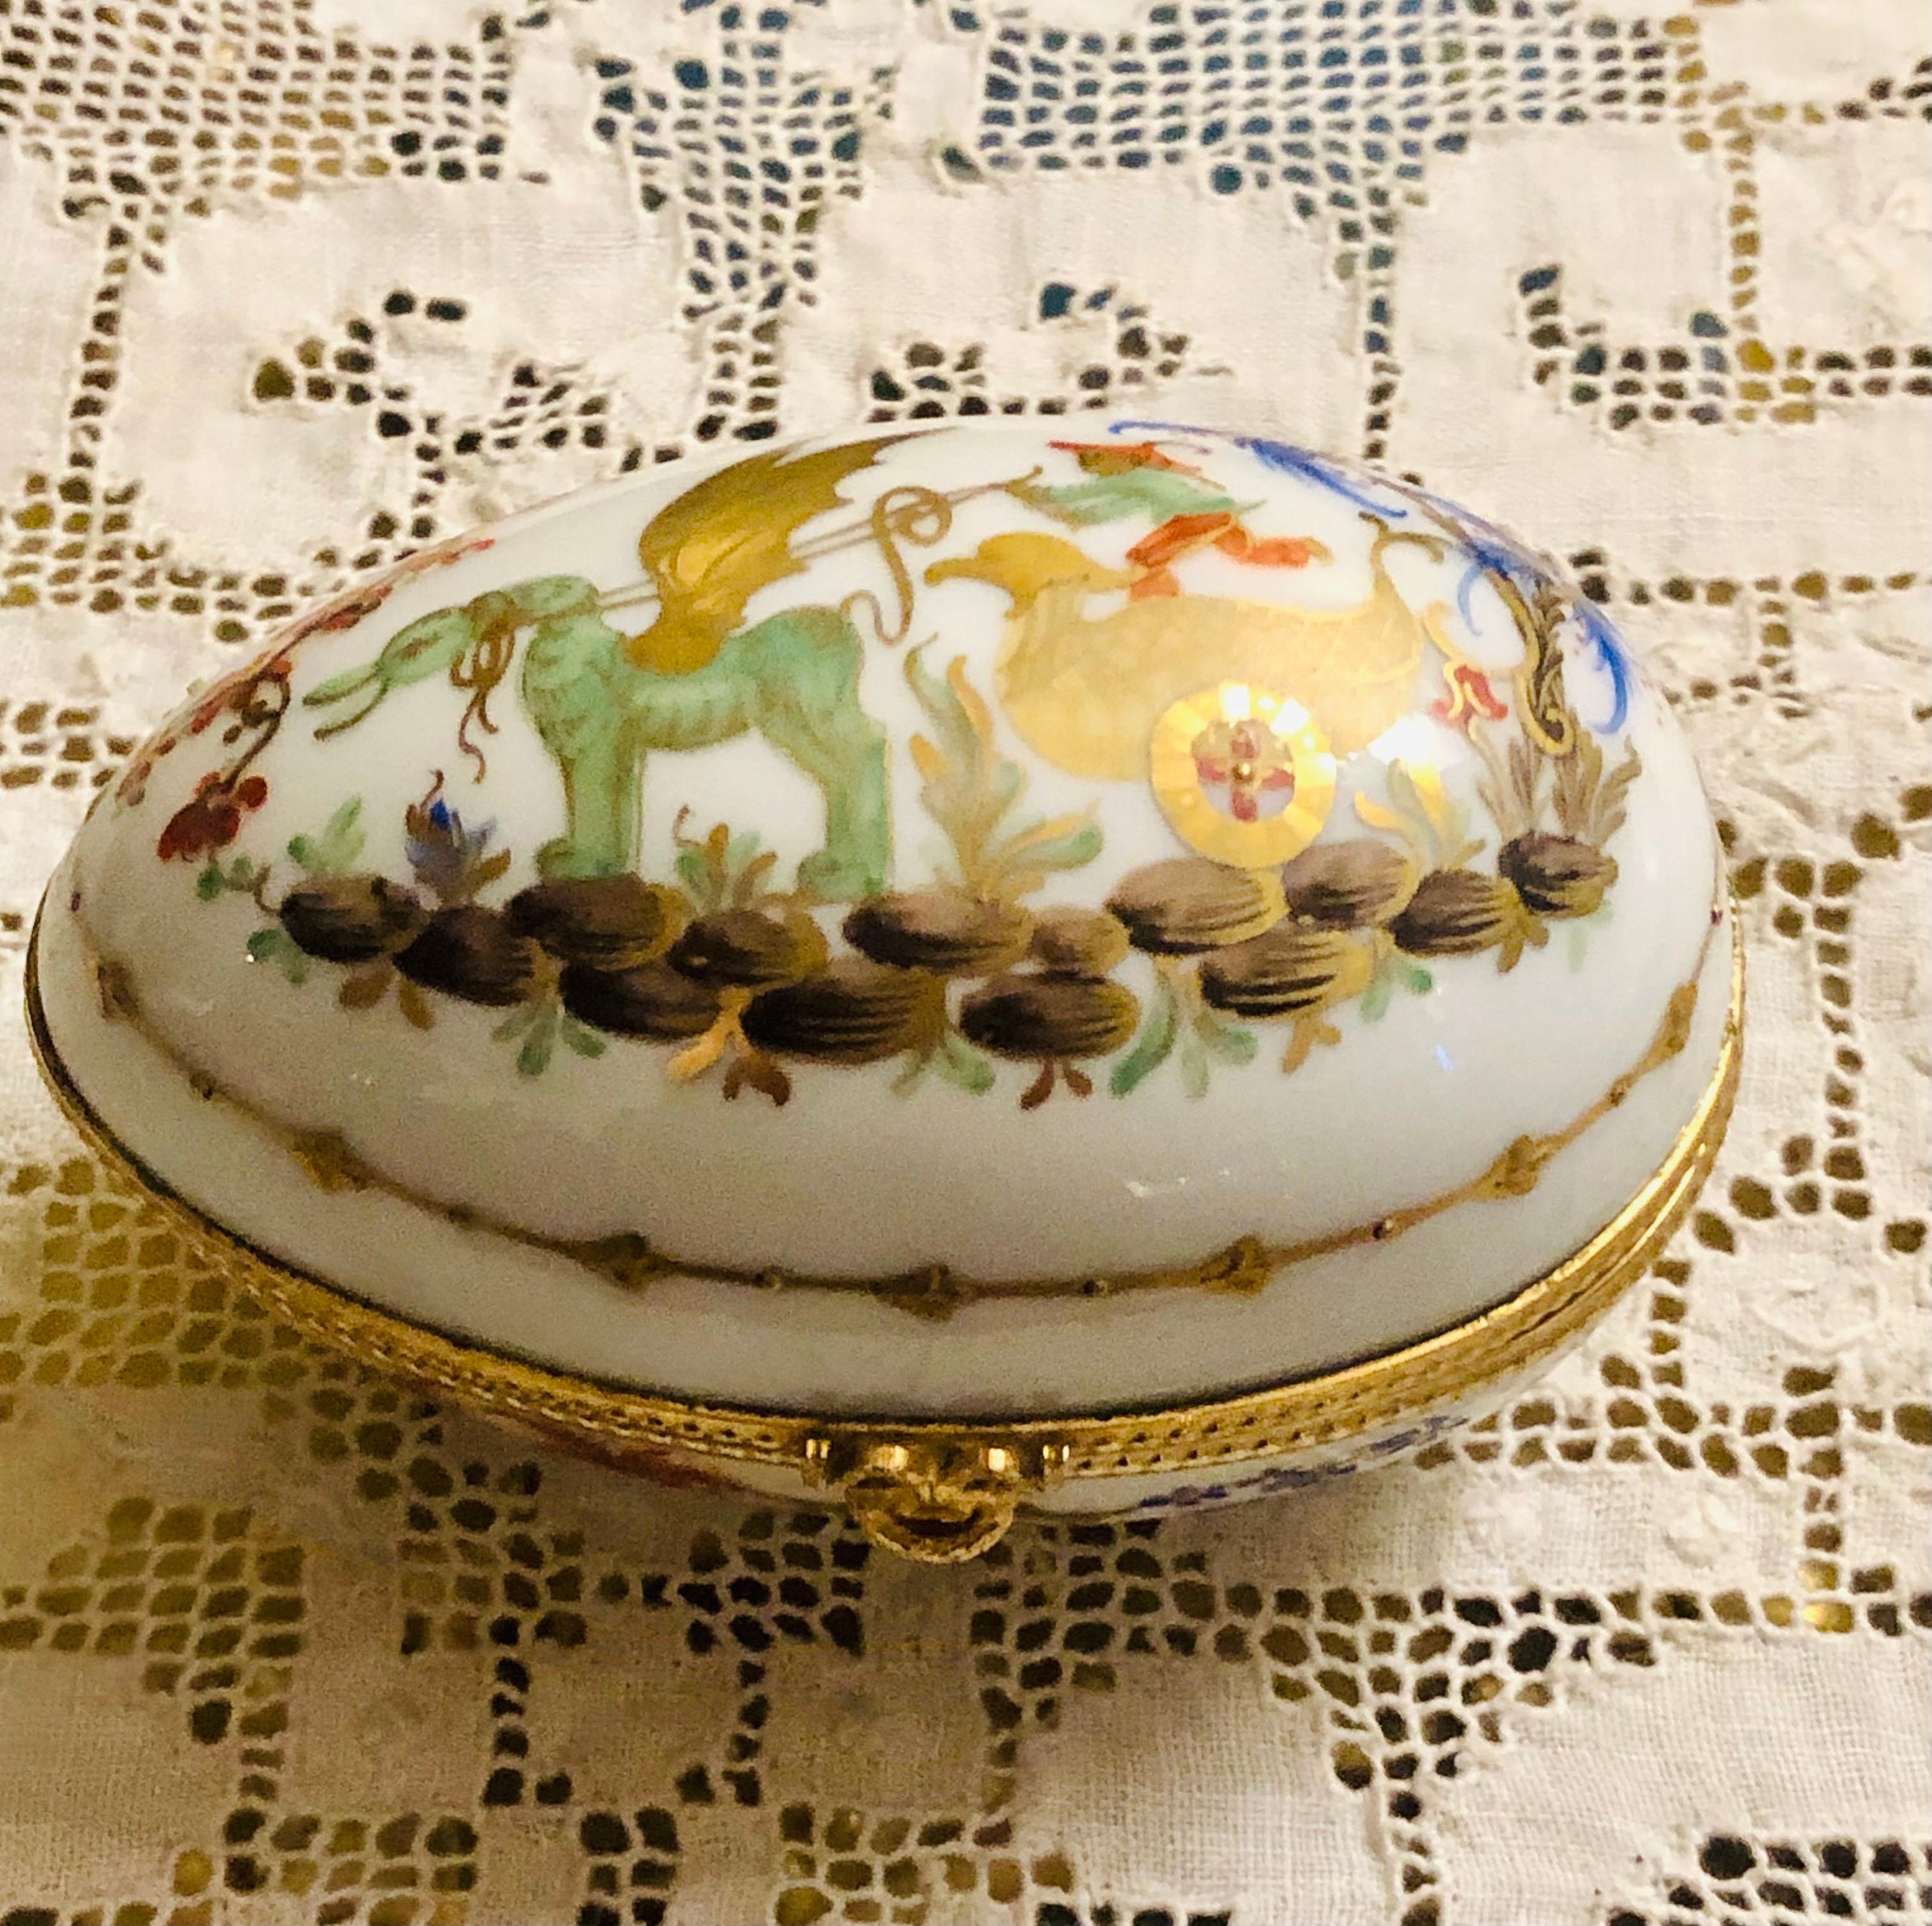 I am offering you this wonderful whimsical Le Tallec porcelain box in the Cirque Chinois pattern on a white ground. It has chinoiserie decoration with accents of raised gilding. It is 4 inches wide. It was made by Le Tallec of Paris, which later